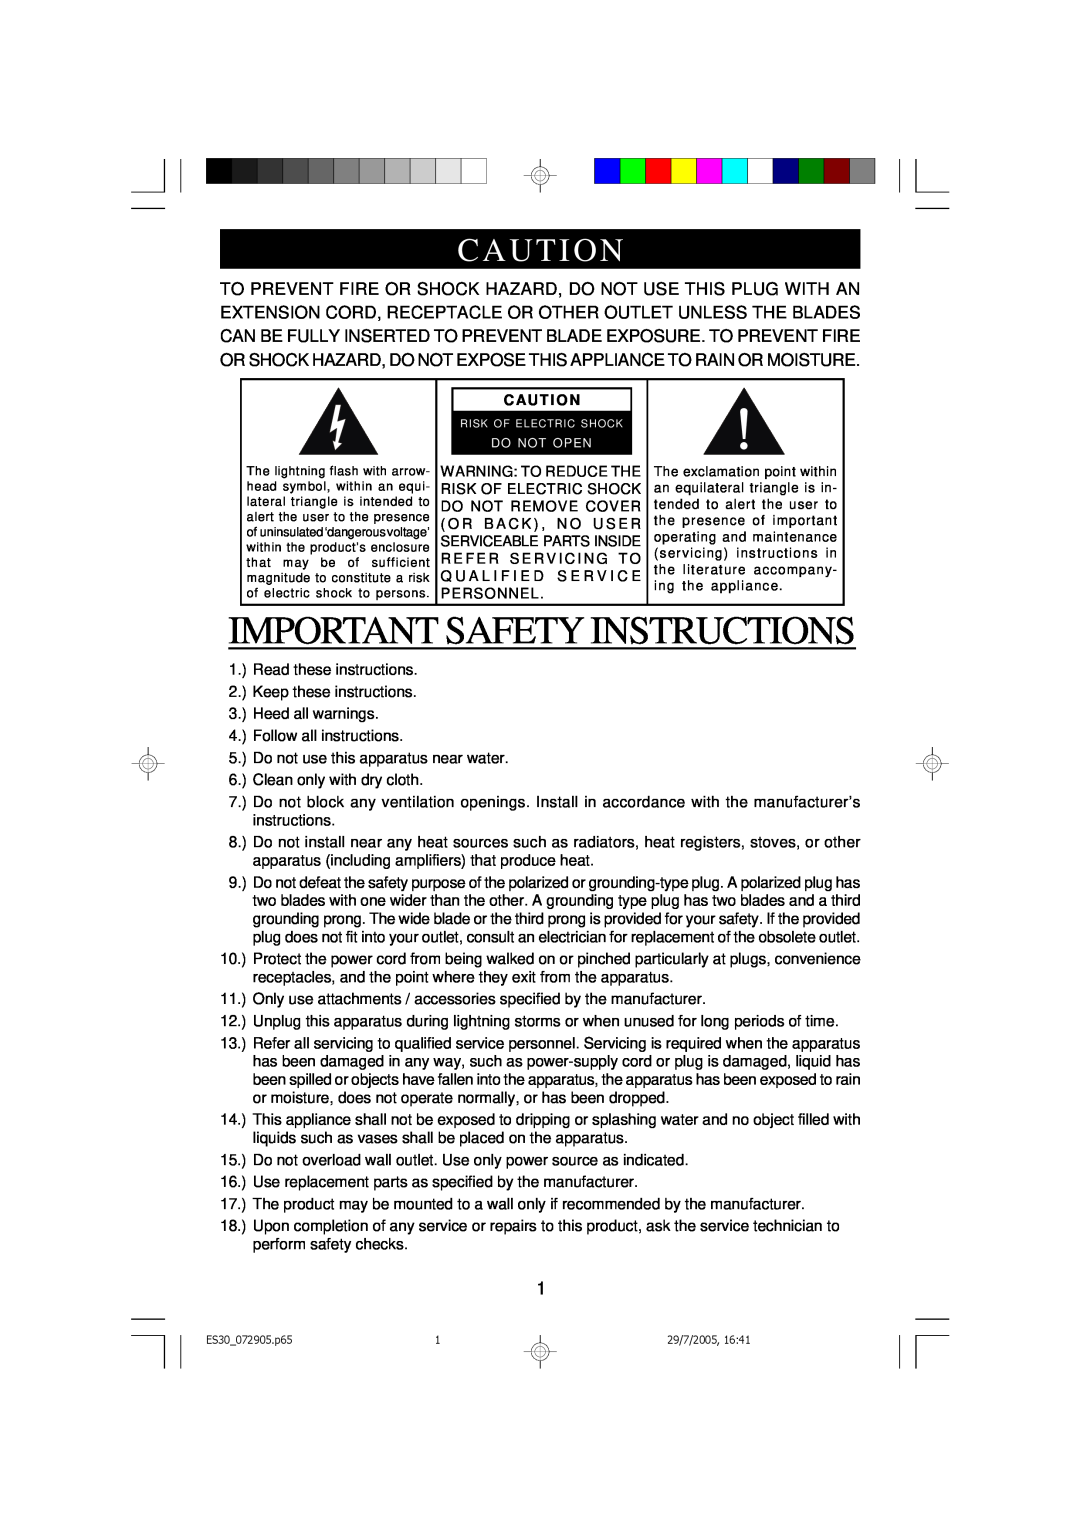 Emerson Process Management ES30 owner manual Important Safety Instructions, Caut I On, Caut I O N 